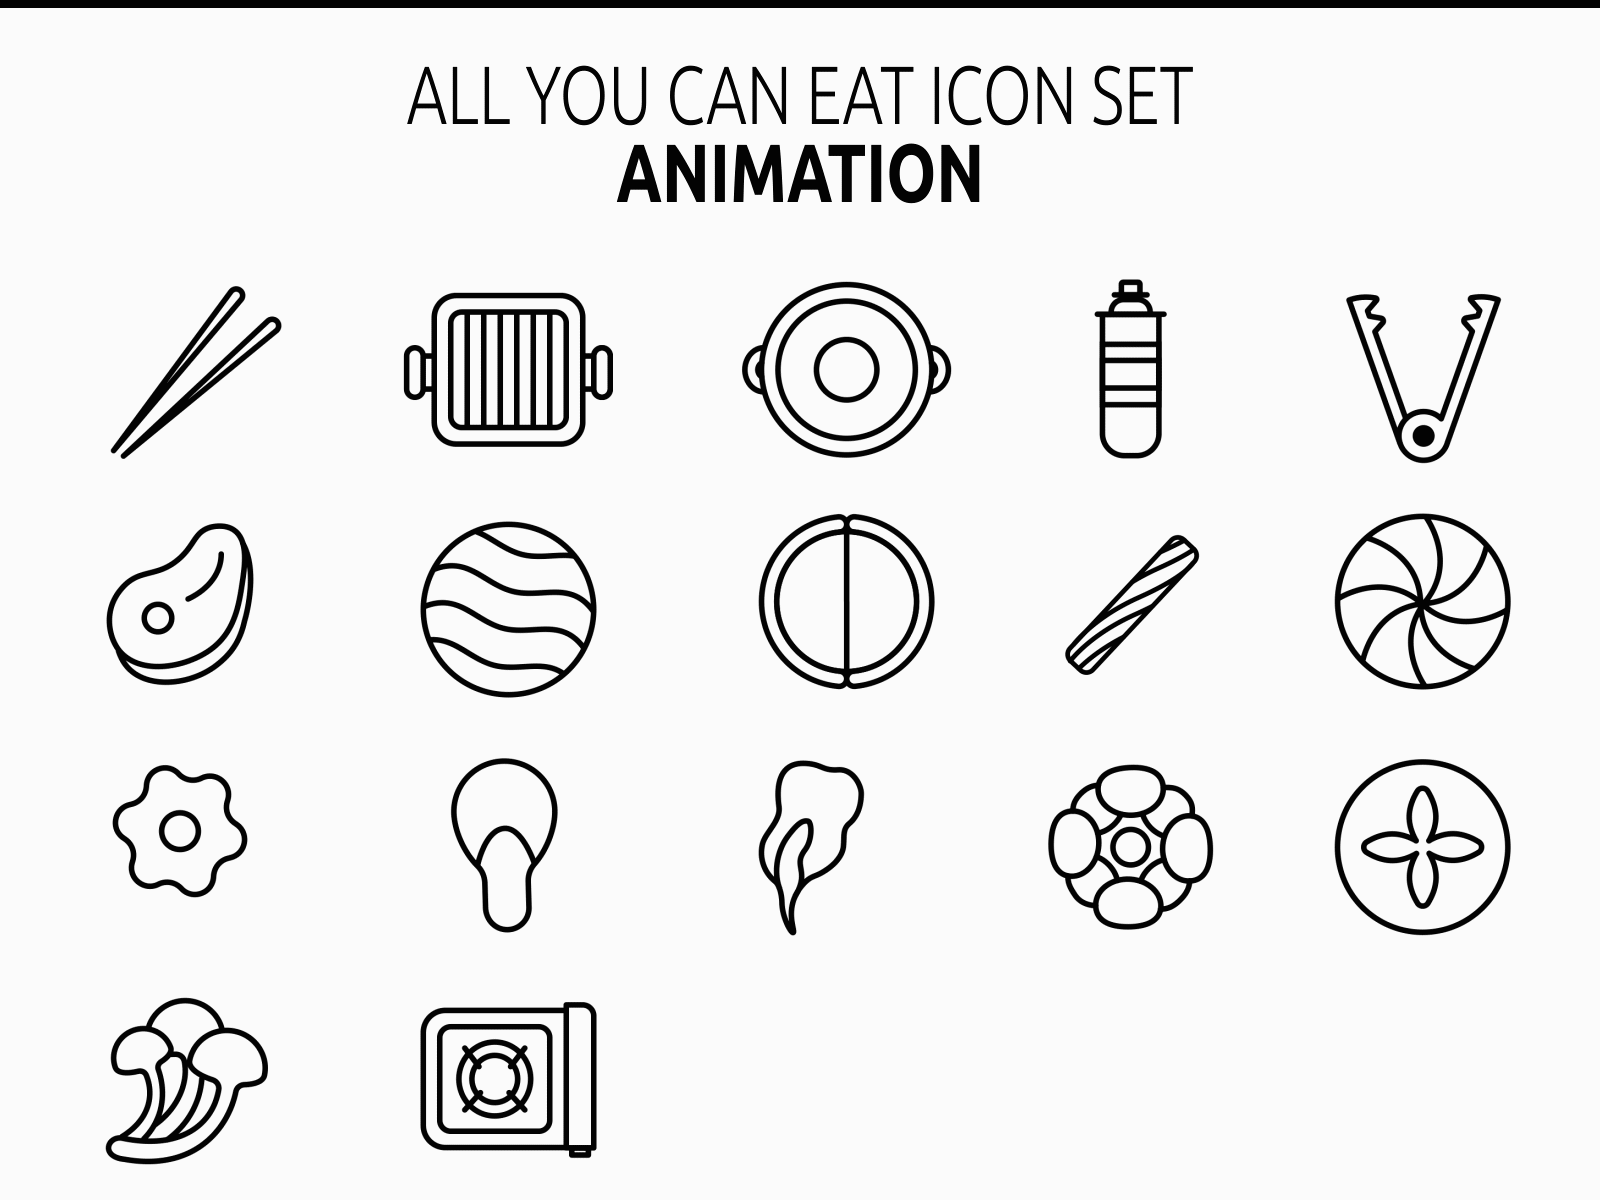 All you can eat icon set animation animation app icon icons json lottie motion graphics ux